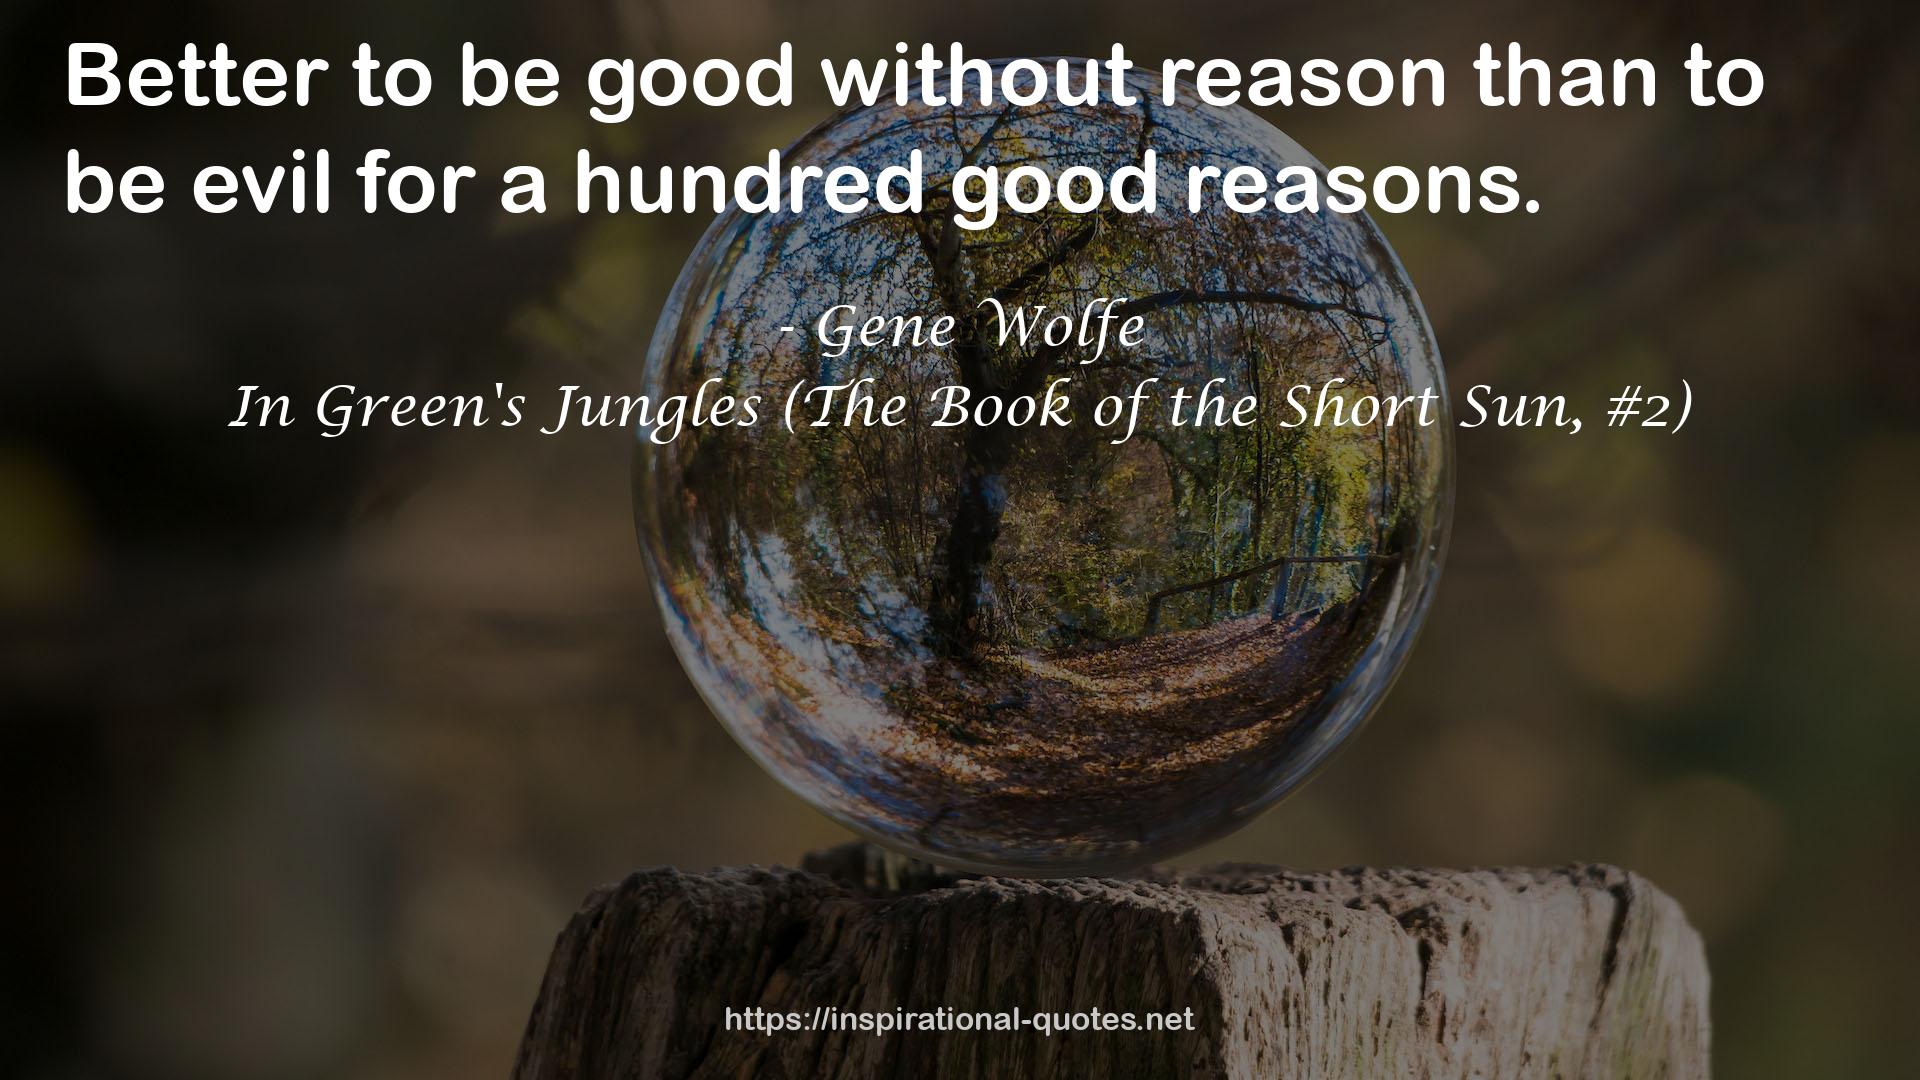 In Green's Jungles (The Book of the Short Sun, #2) QUOTES